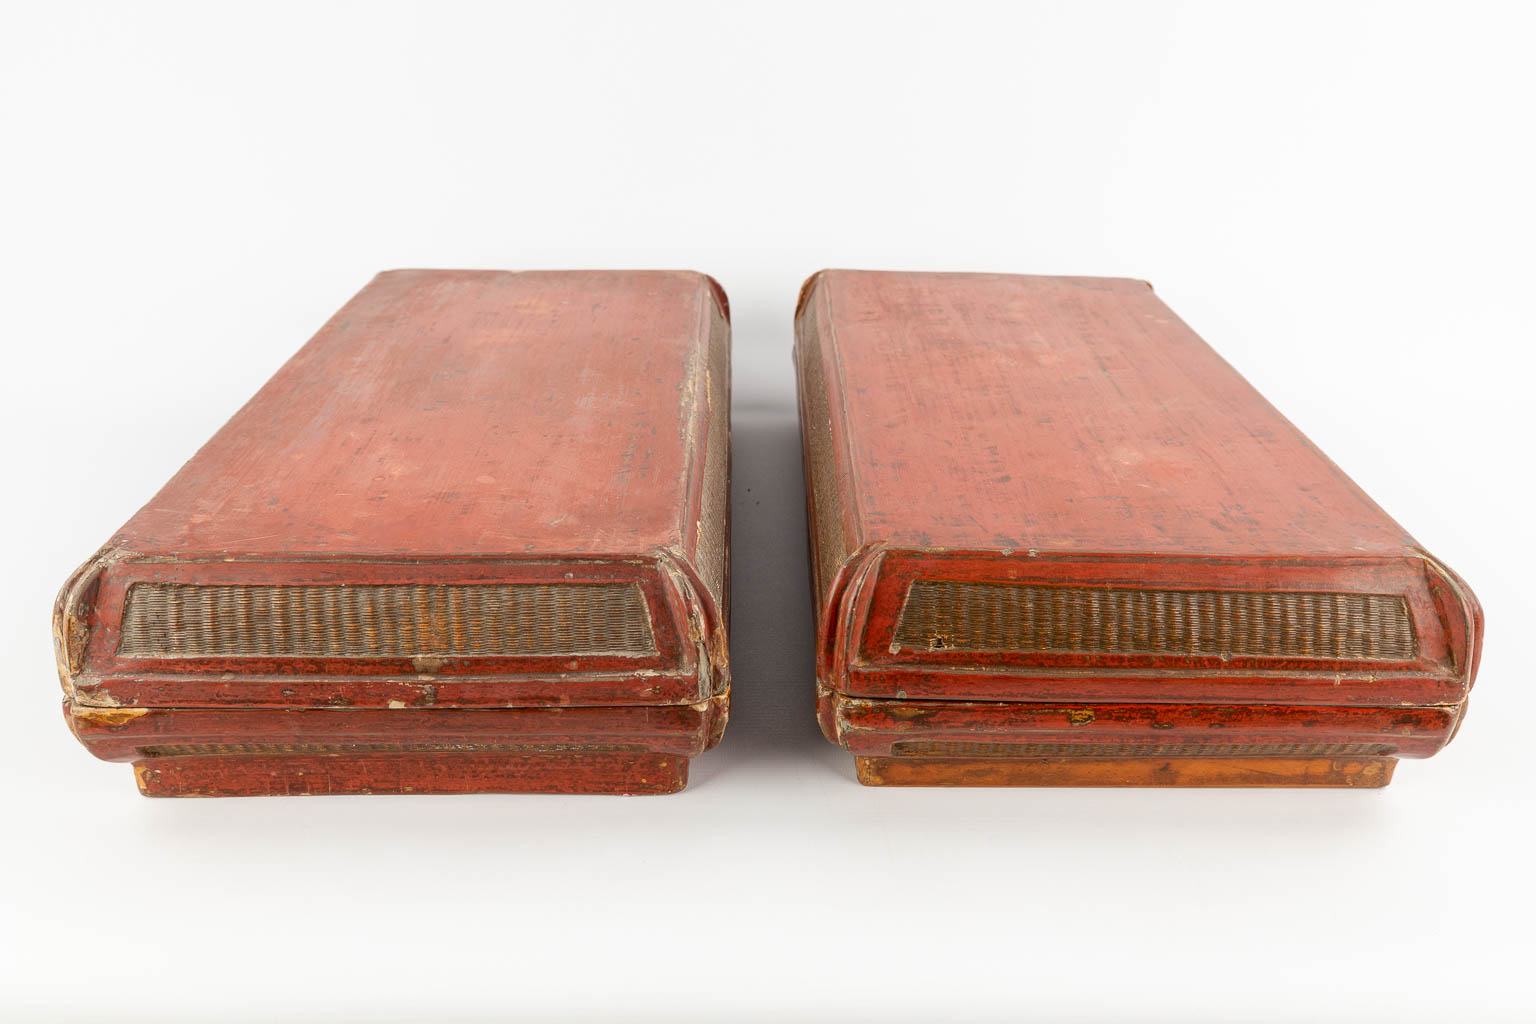 Two antique Chinese boxes with a lid, lacquered wood. (D:28 x W:56 x H:12 cm)